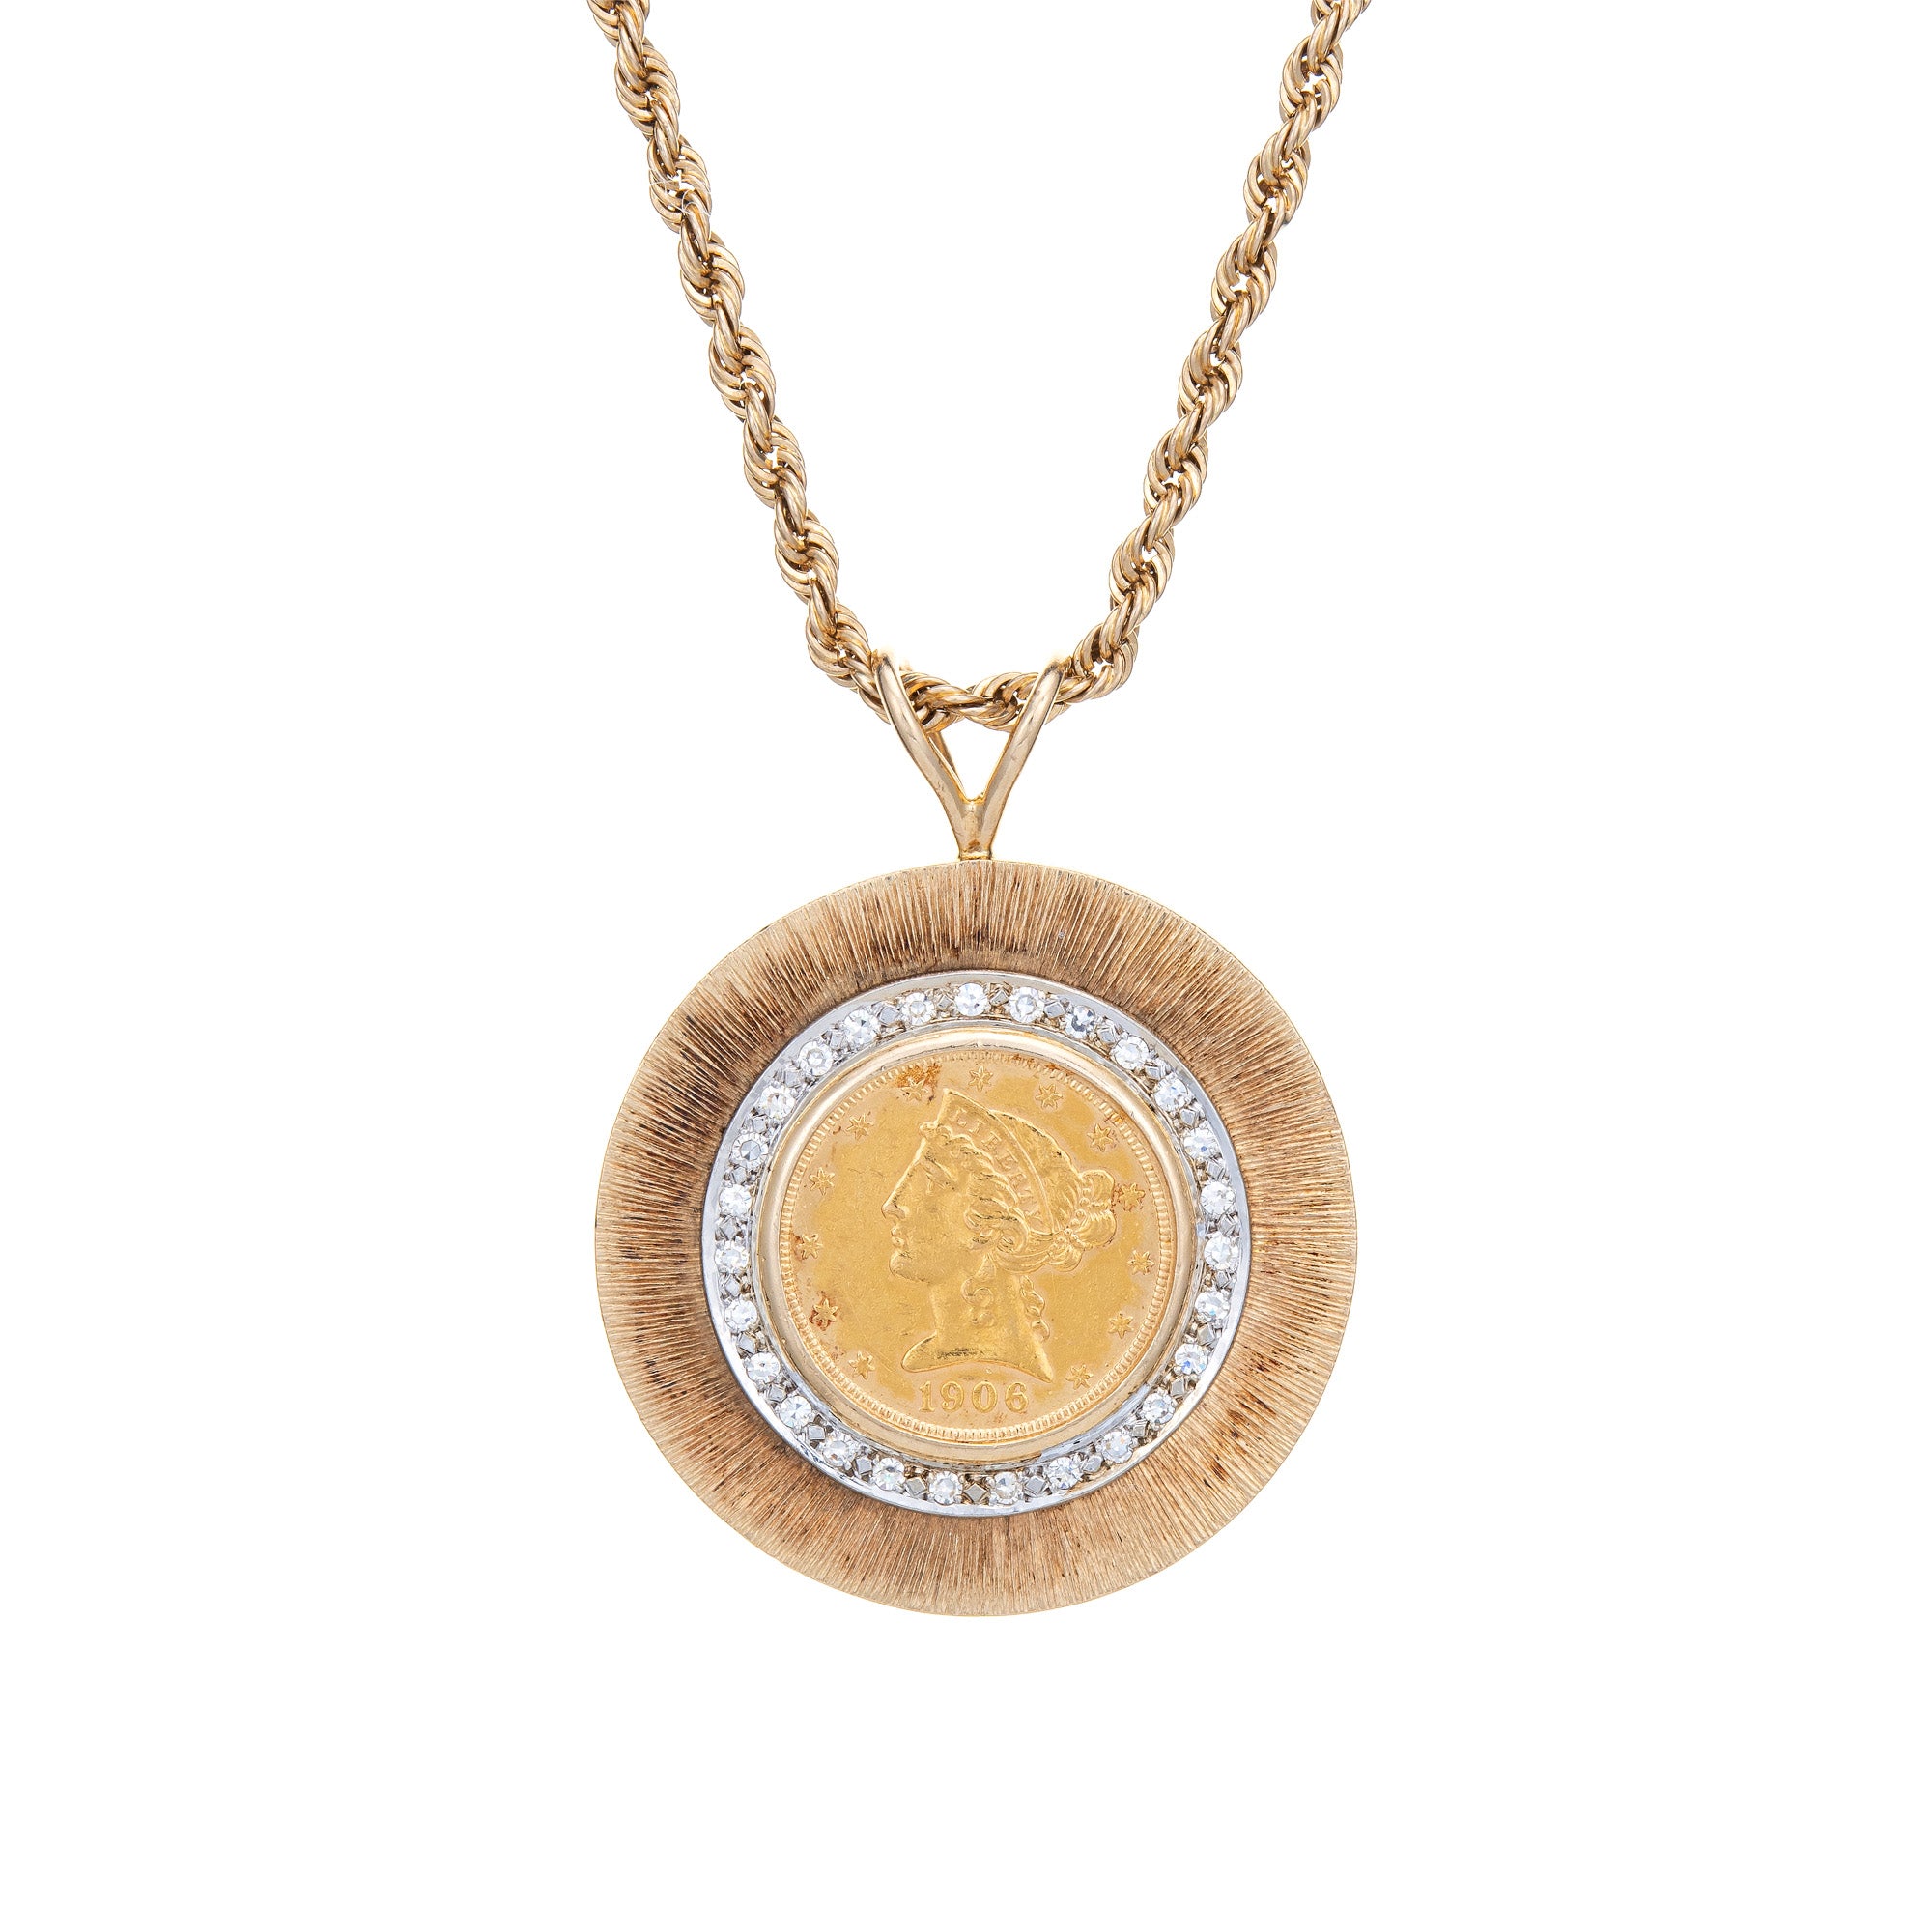 Italian 14kt Yellow Gold Reversible Replica 100-Lira Coin Pendant Necklace  in 14kt Yellow Gold | Ross-Simons